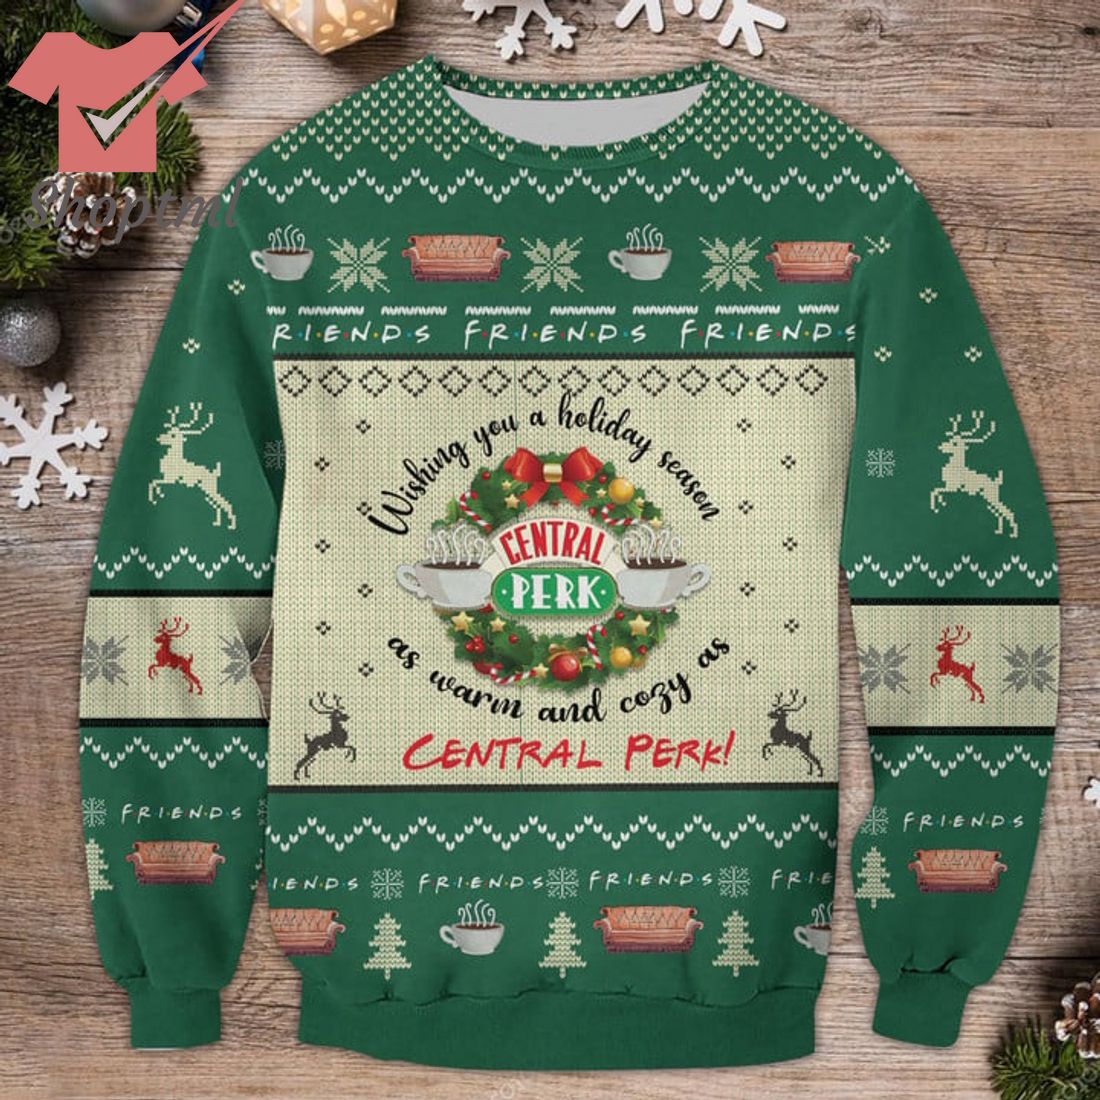 Central Perk wishing you a holiday season as warm and cozy as Central Perk sweater 